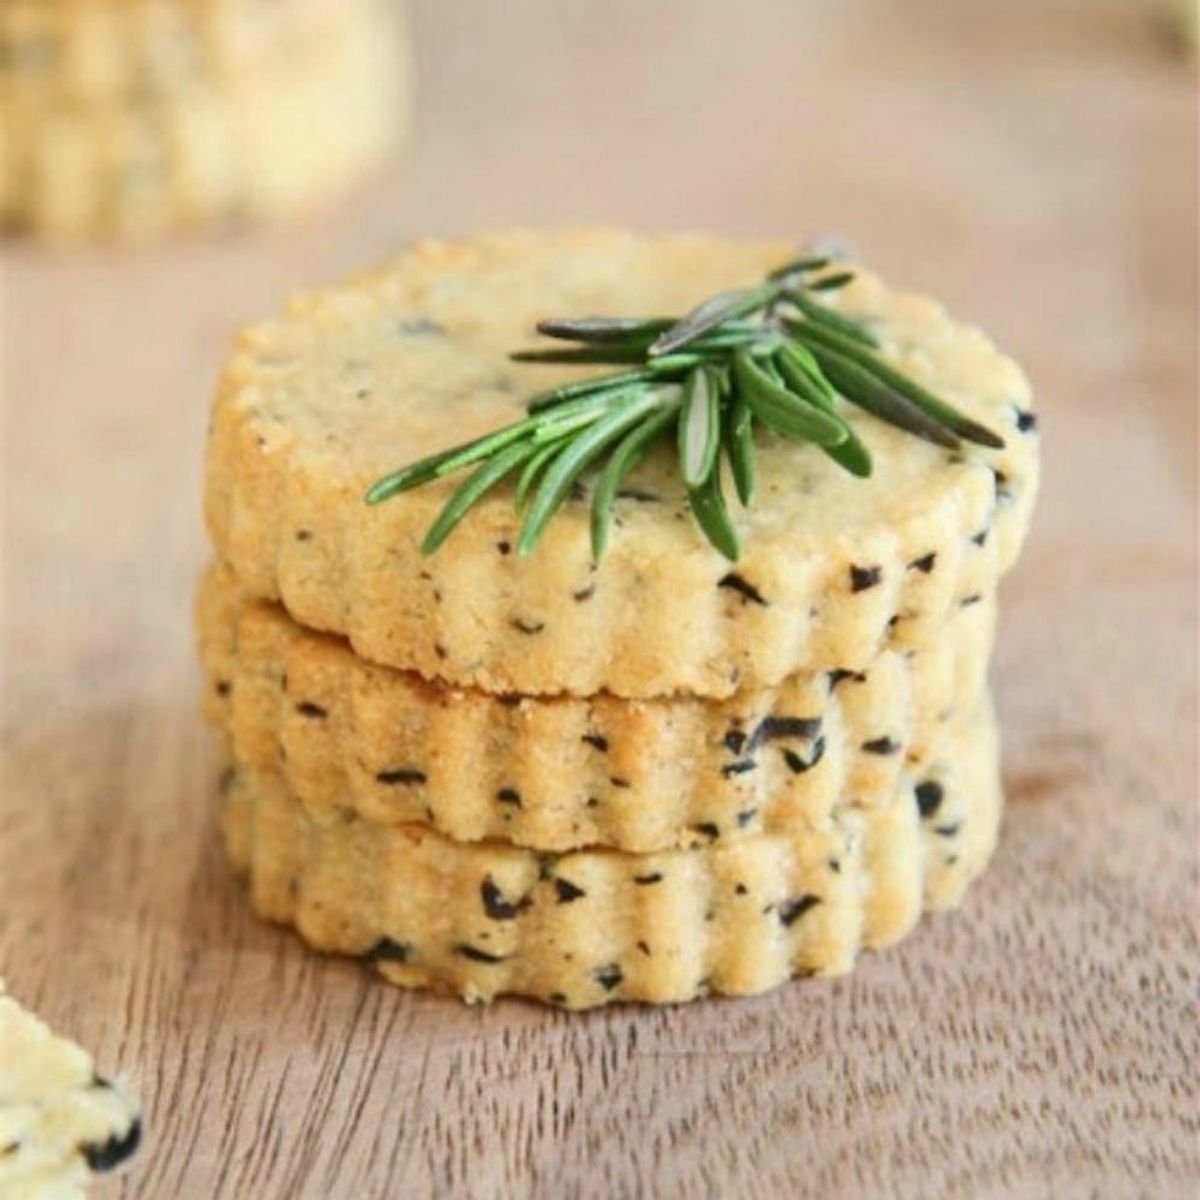 19 Savory Cookie Recipes for Your Next Cocktail Party